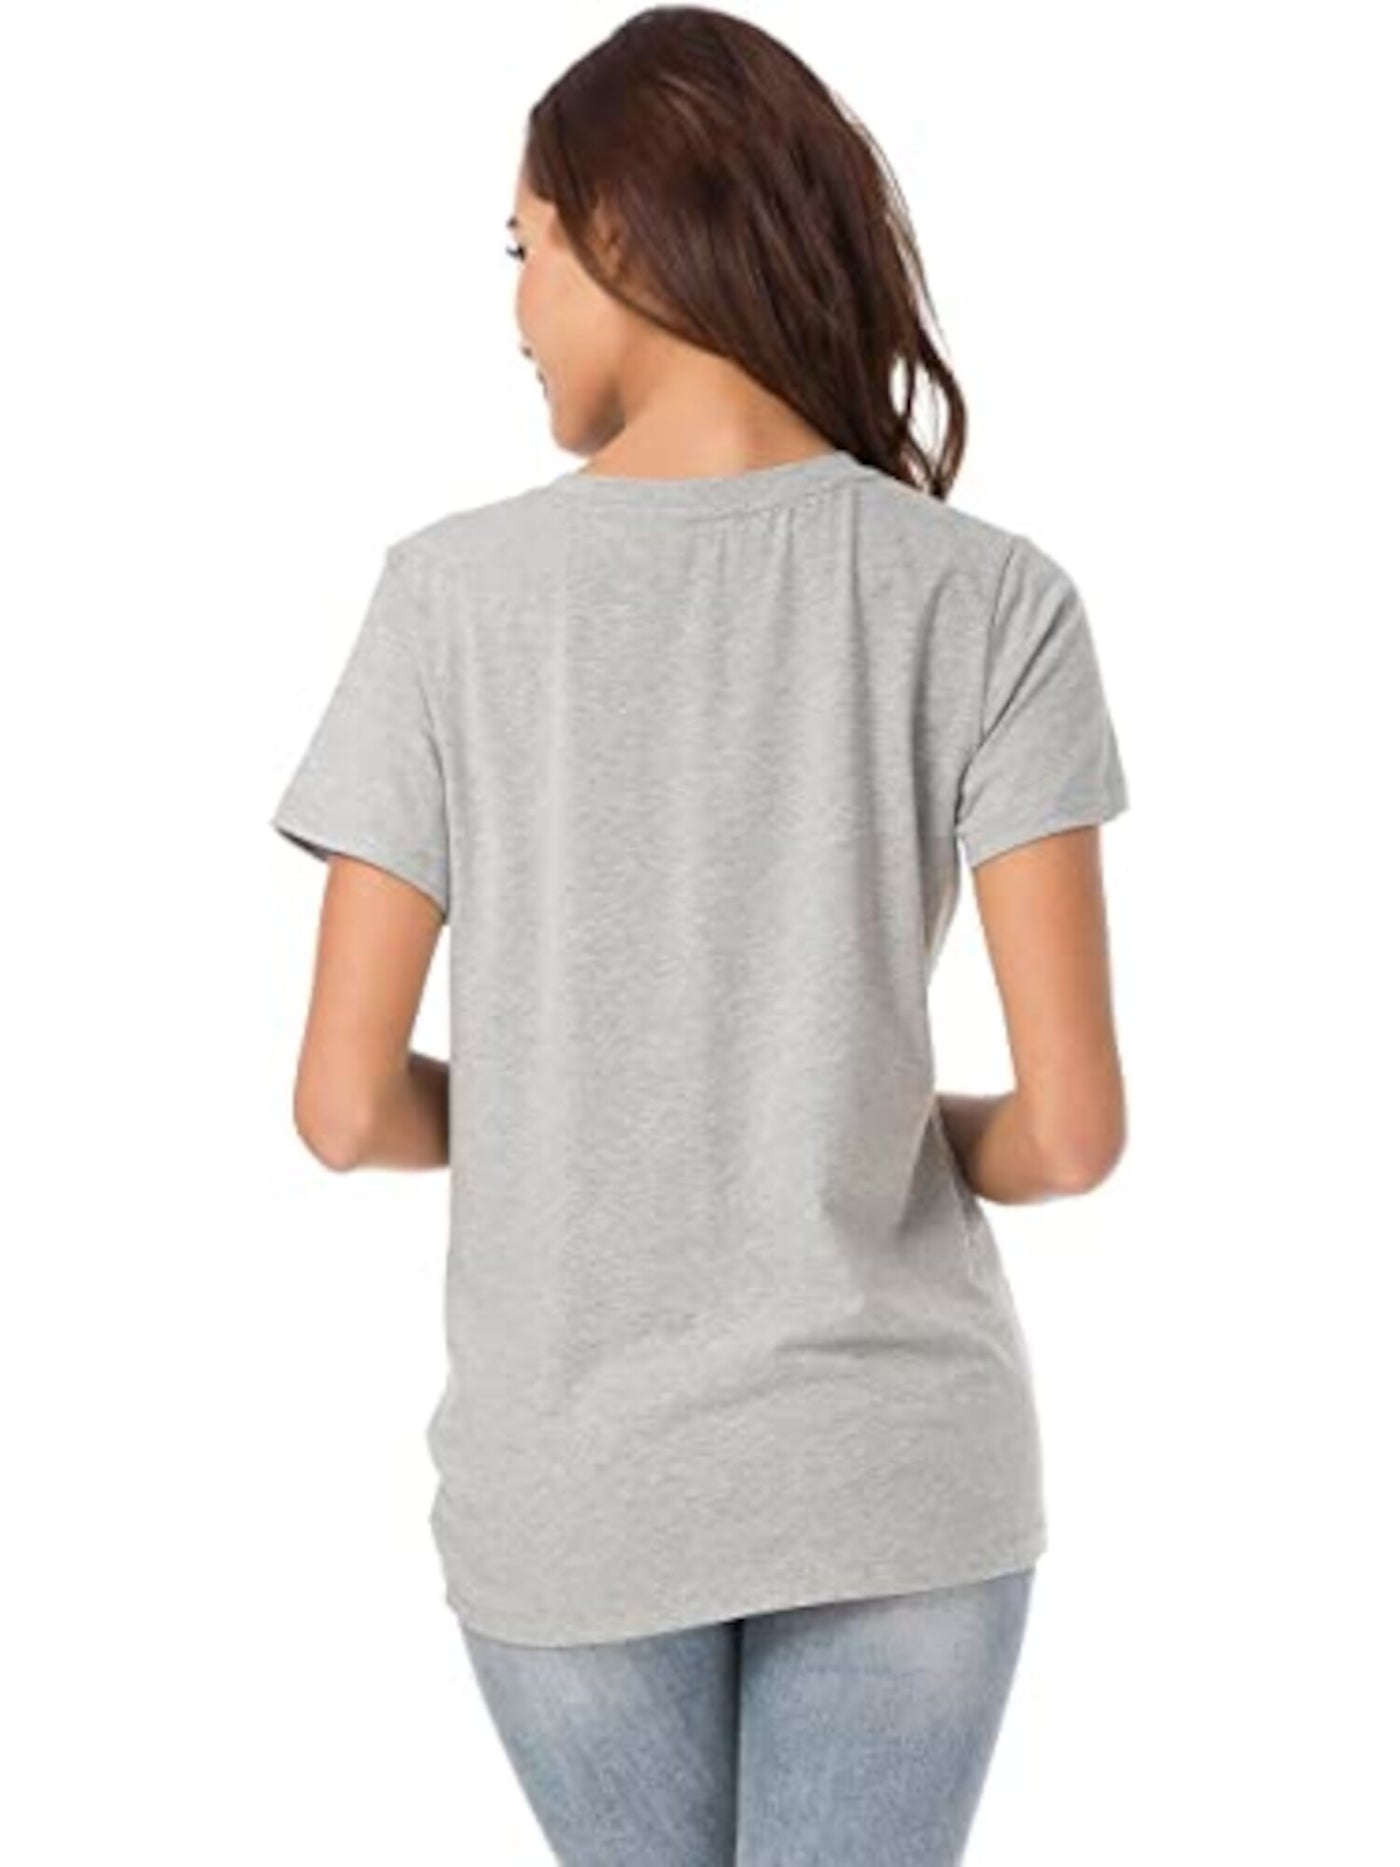 AND NOW THIS Womens Gray Stretch Heather Short Sleeve Crew Neck T-Shirt S